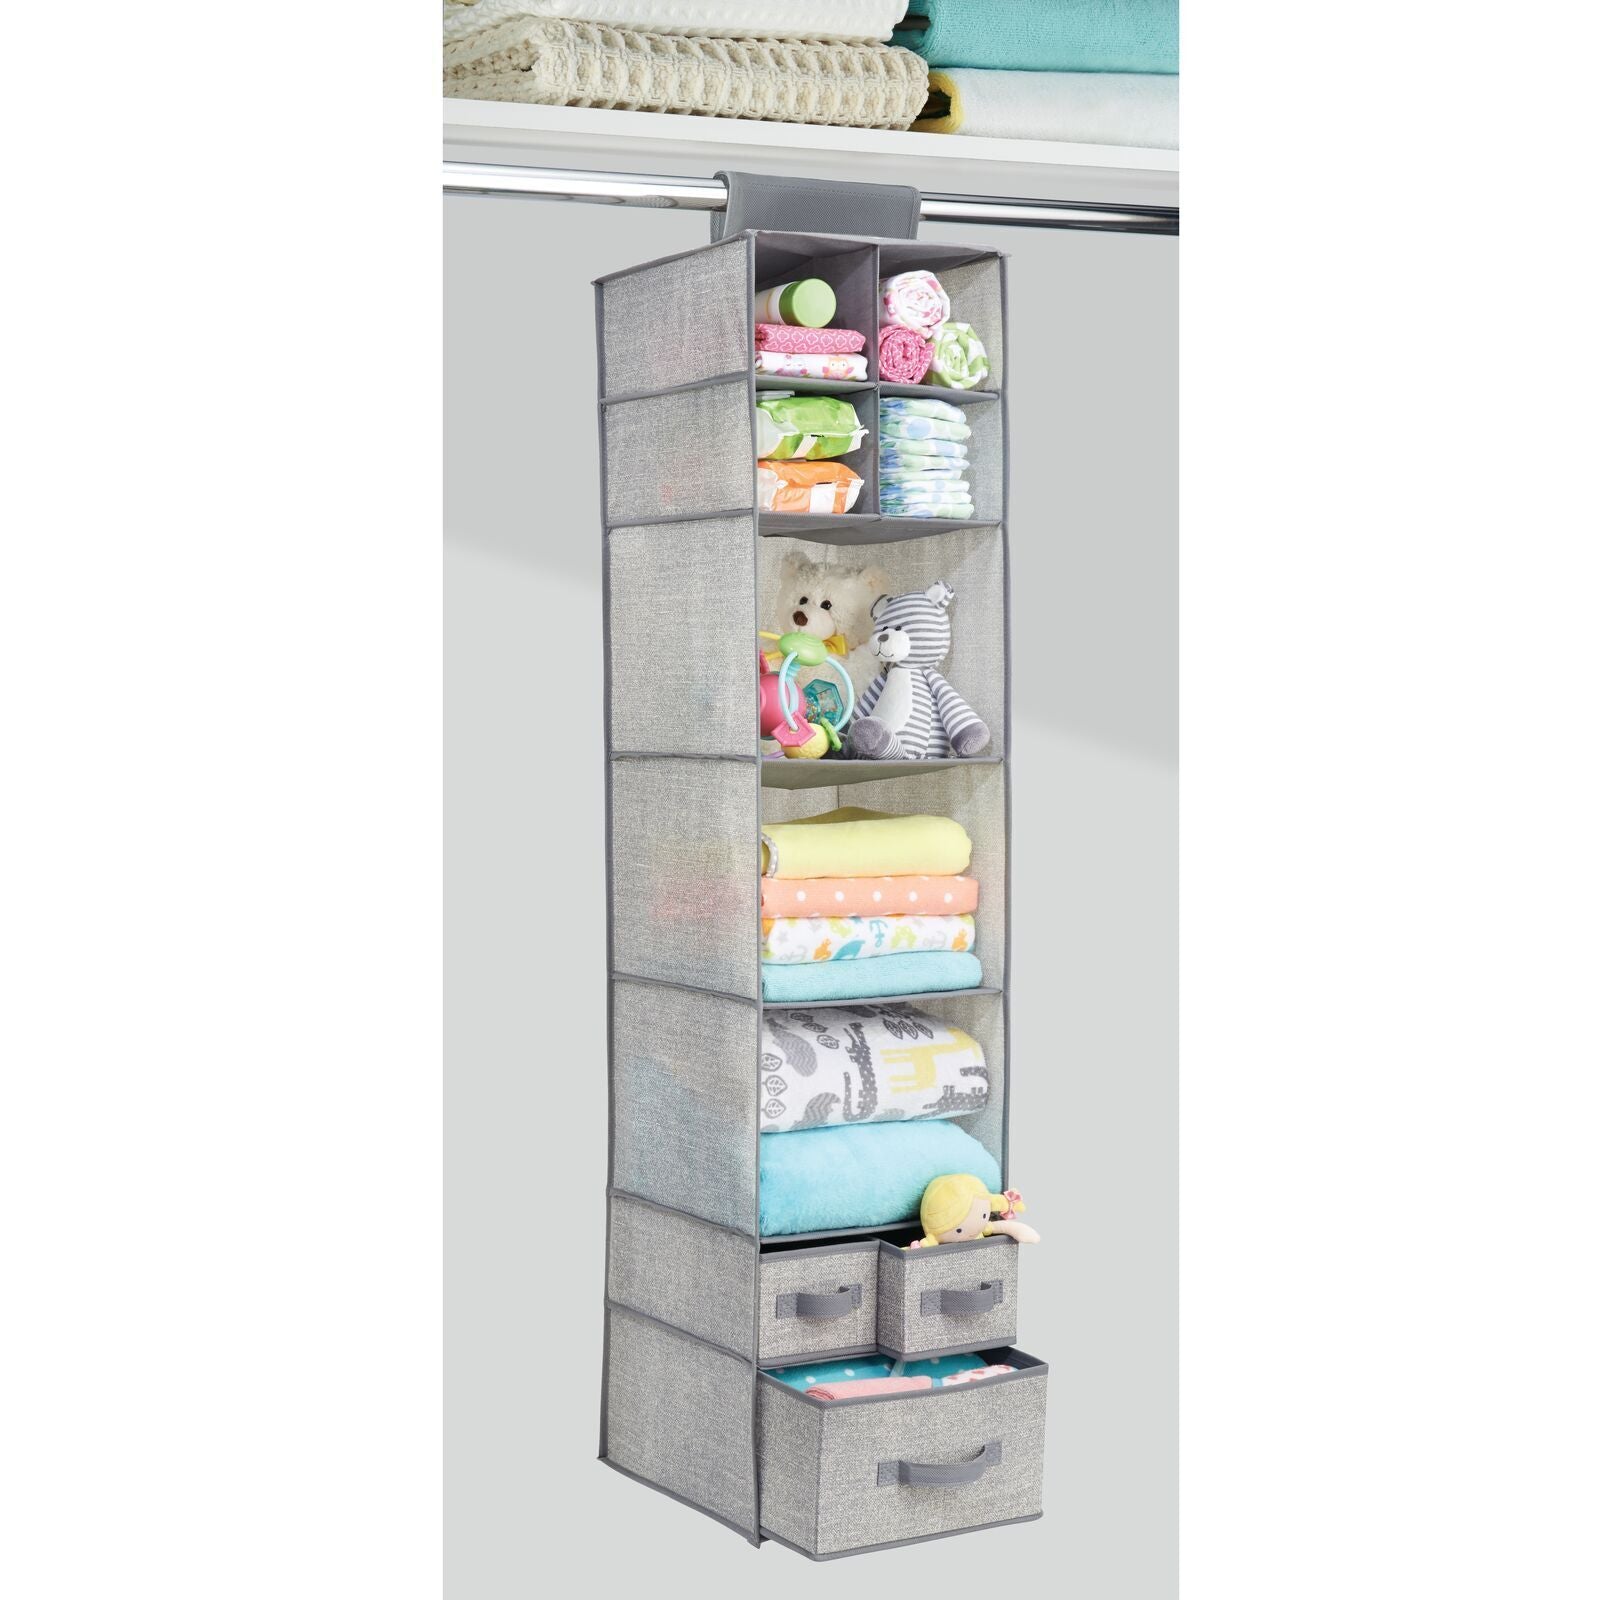 BlushBees® Long Soft Fabric Over Closet Rod Hanging Storage Organizer with 7 Shelves + 3 Drawer